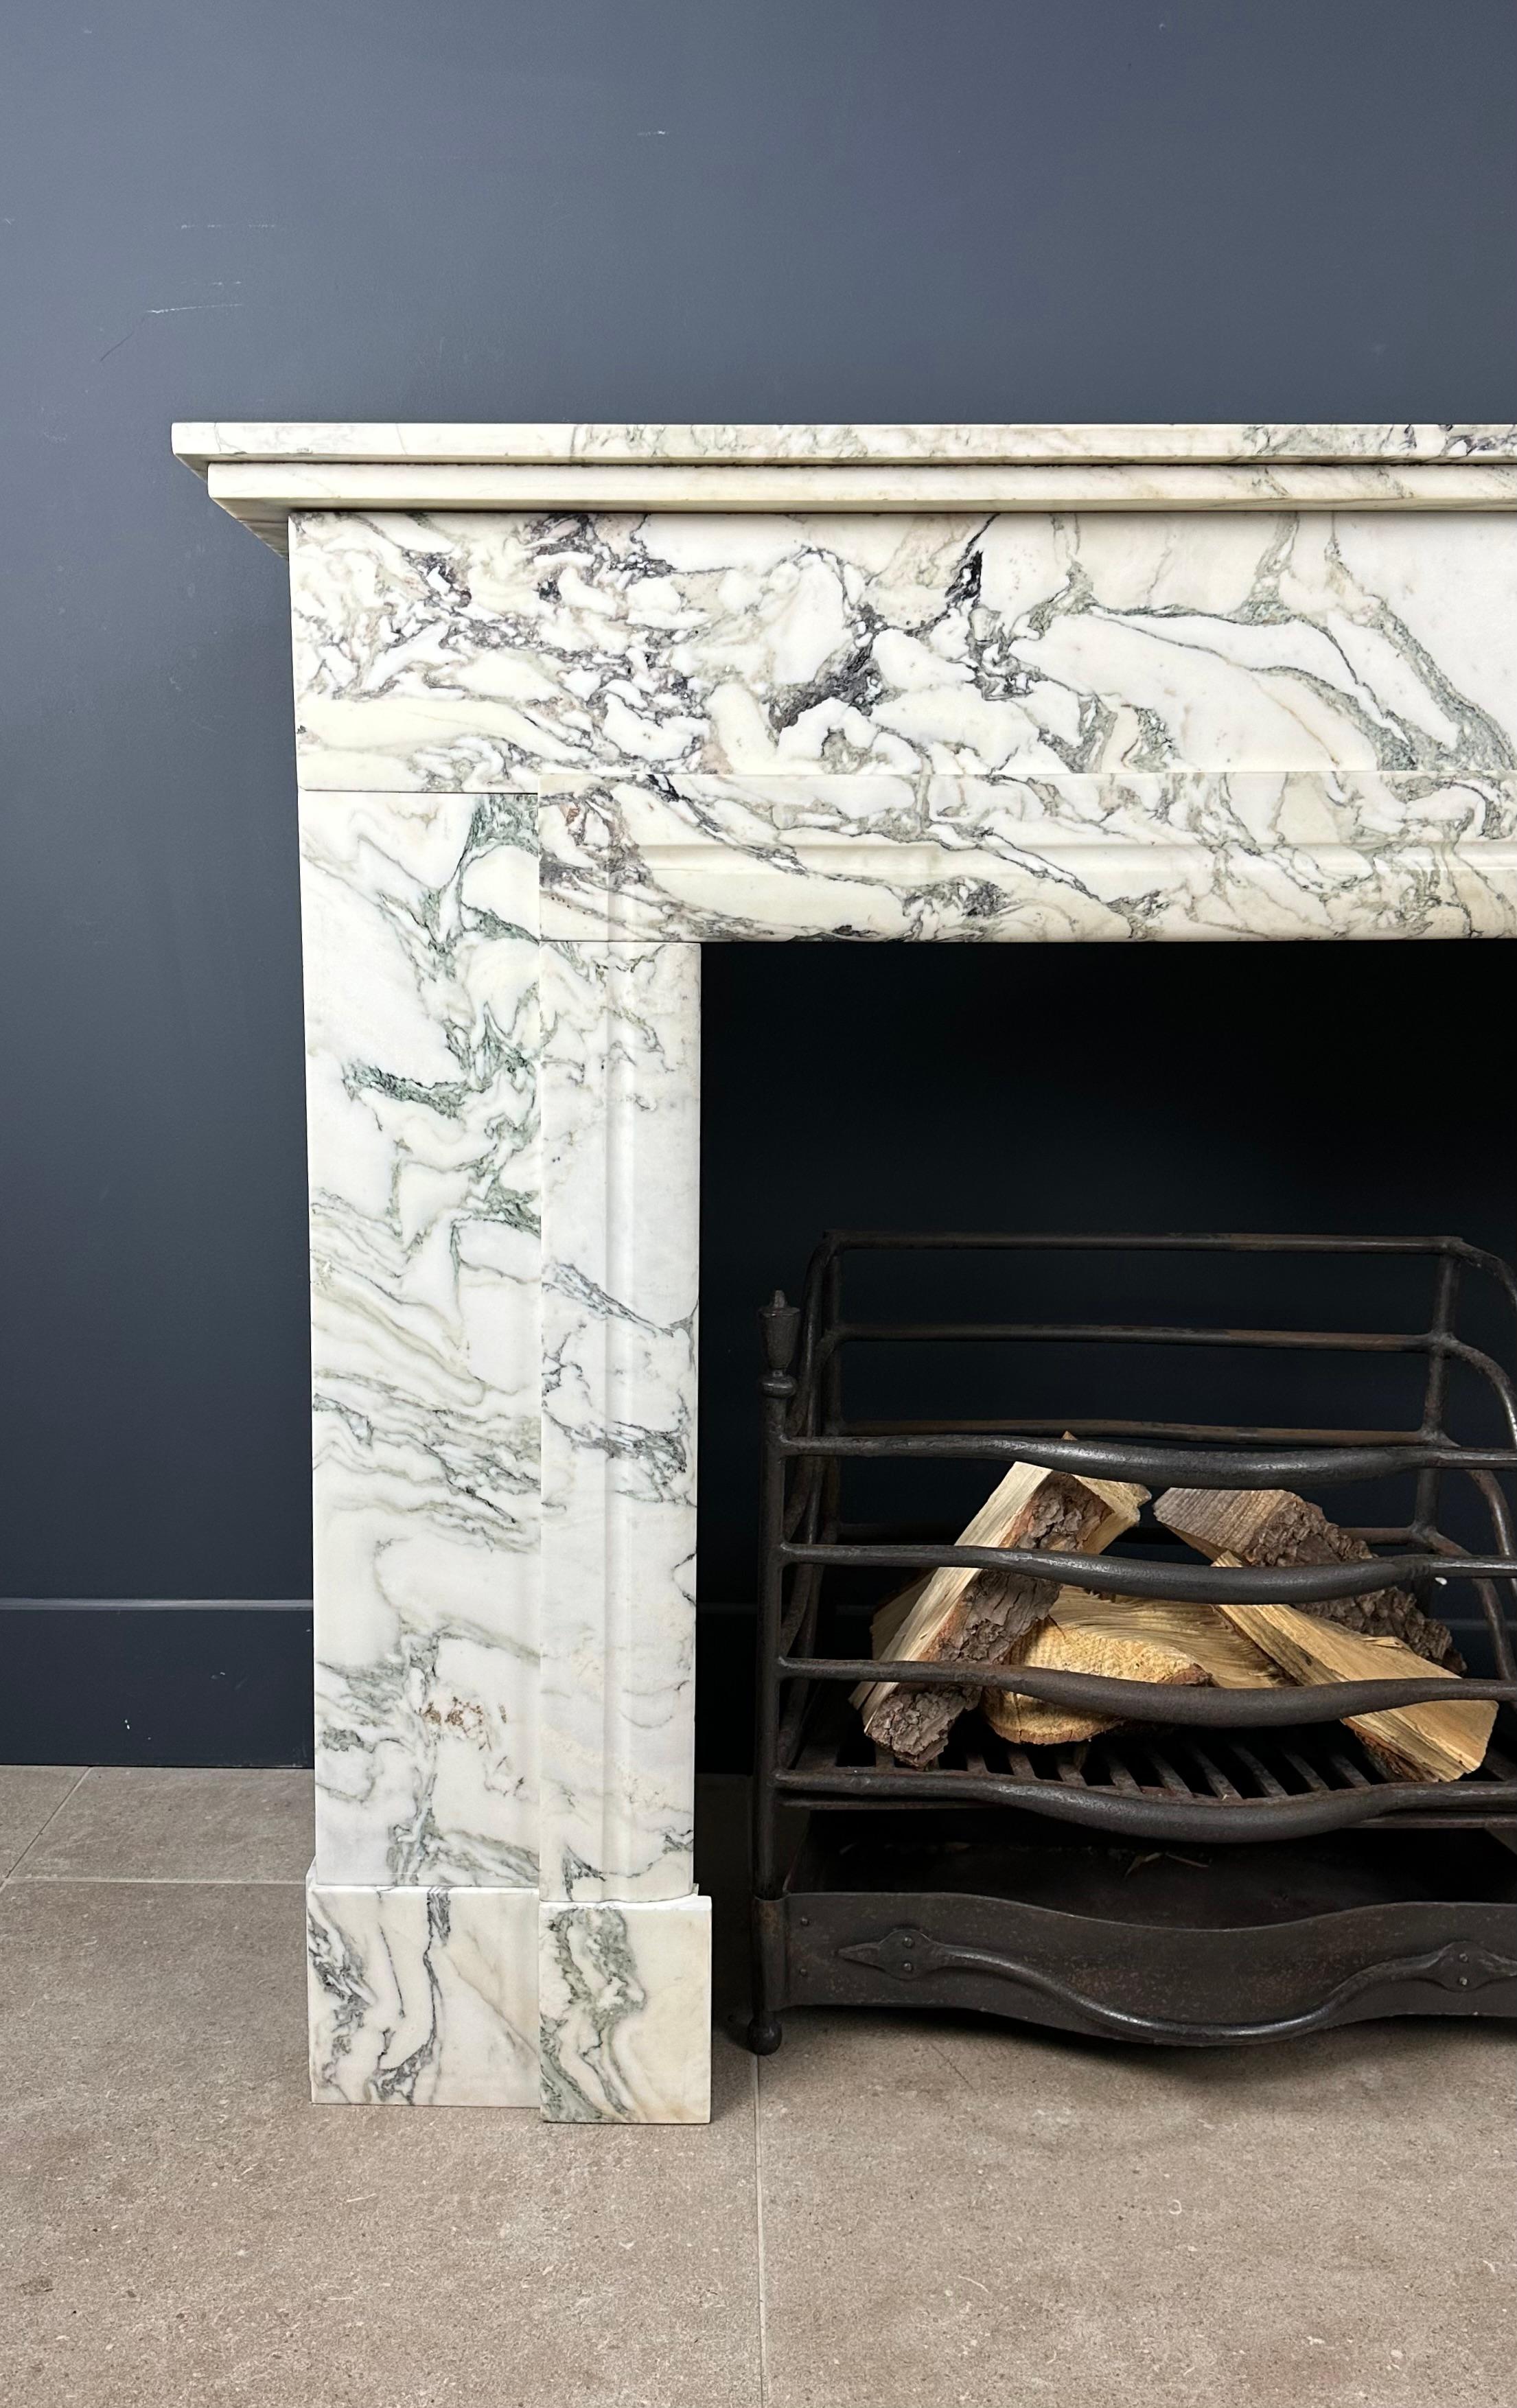 Enter an era of opulent sophistication with our Antique Art Deco Fireplace in white marble. The matchless combination of beautiful green-gray veining and distinctive Art Deco style makes this fireplace a visual masterpiece and a tribute to a bygone